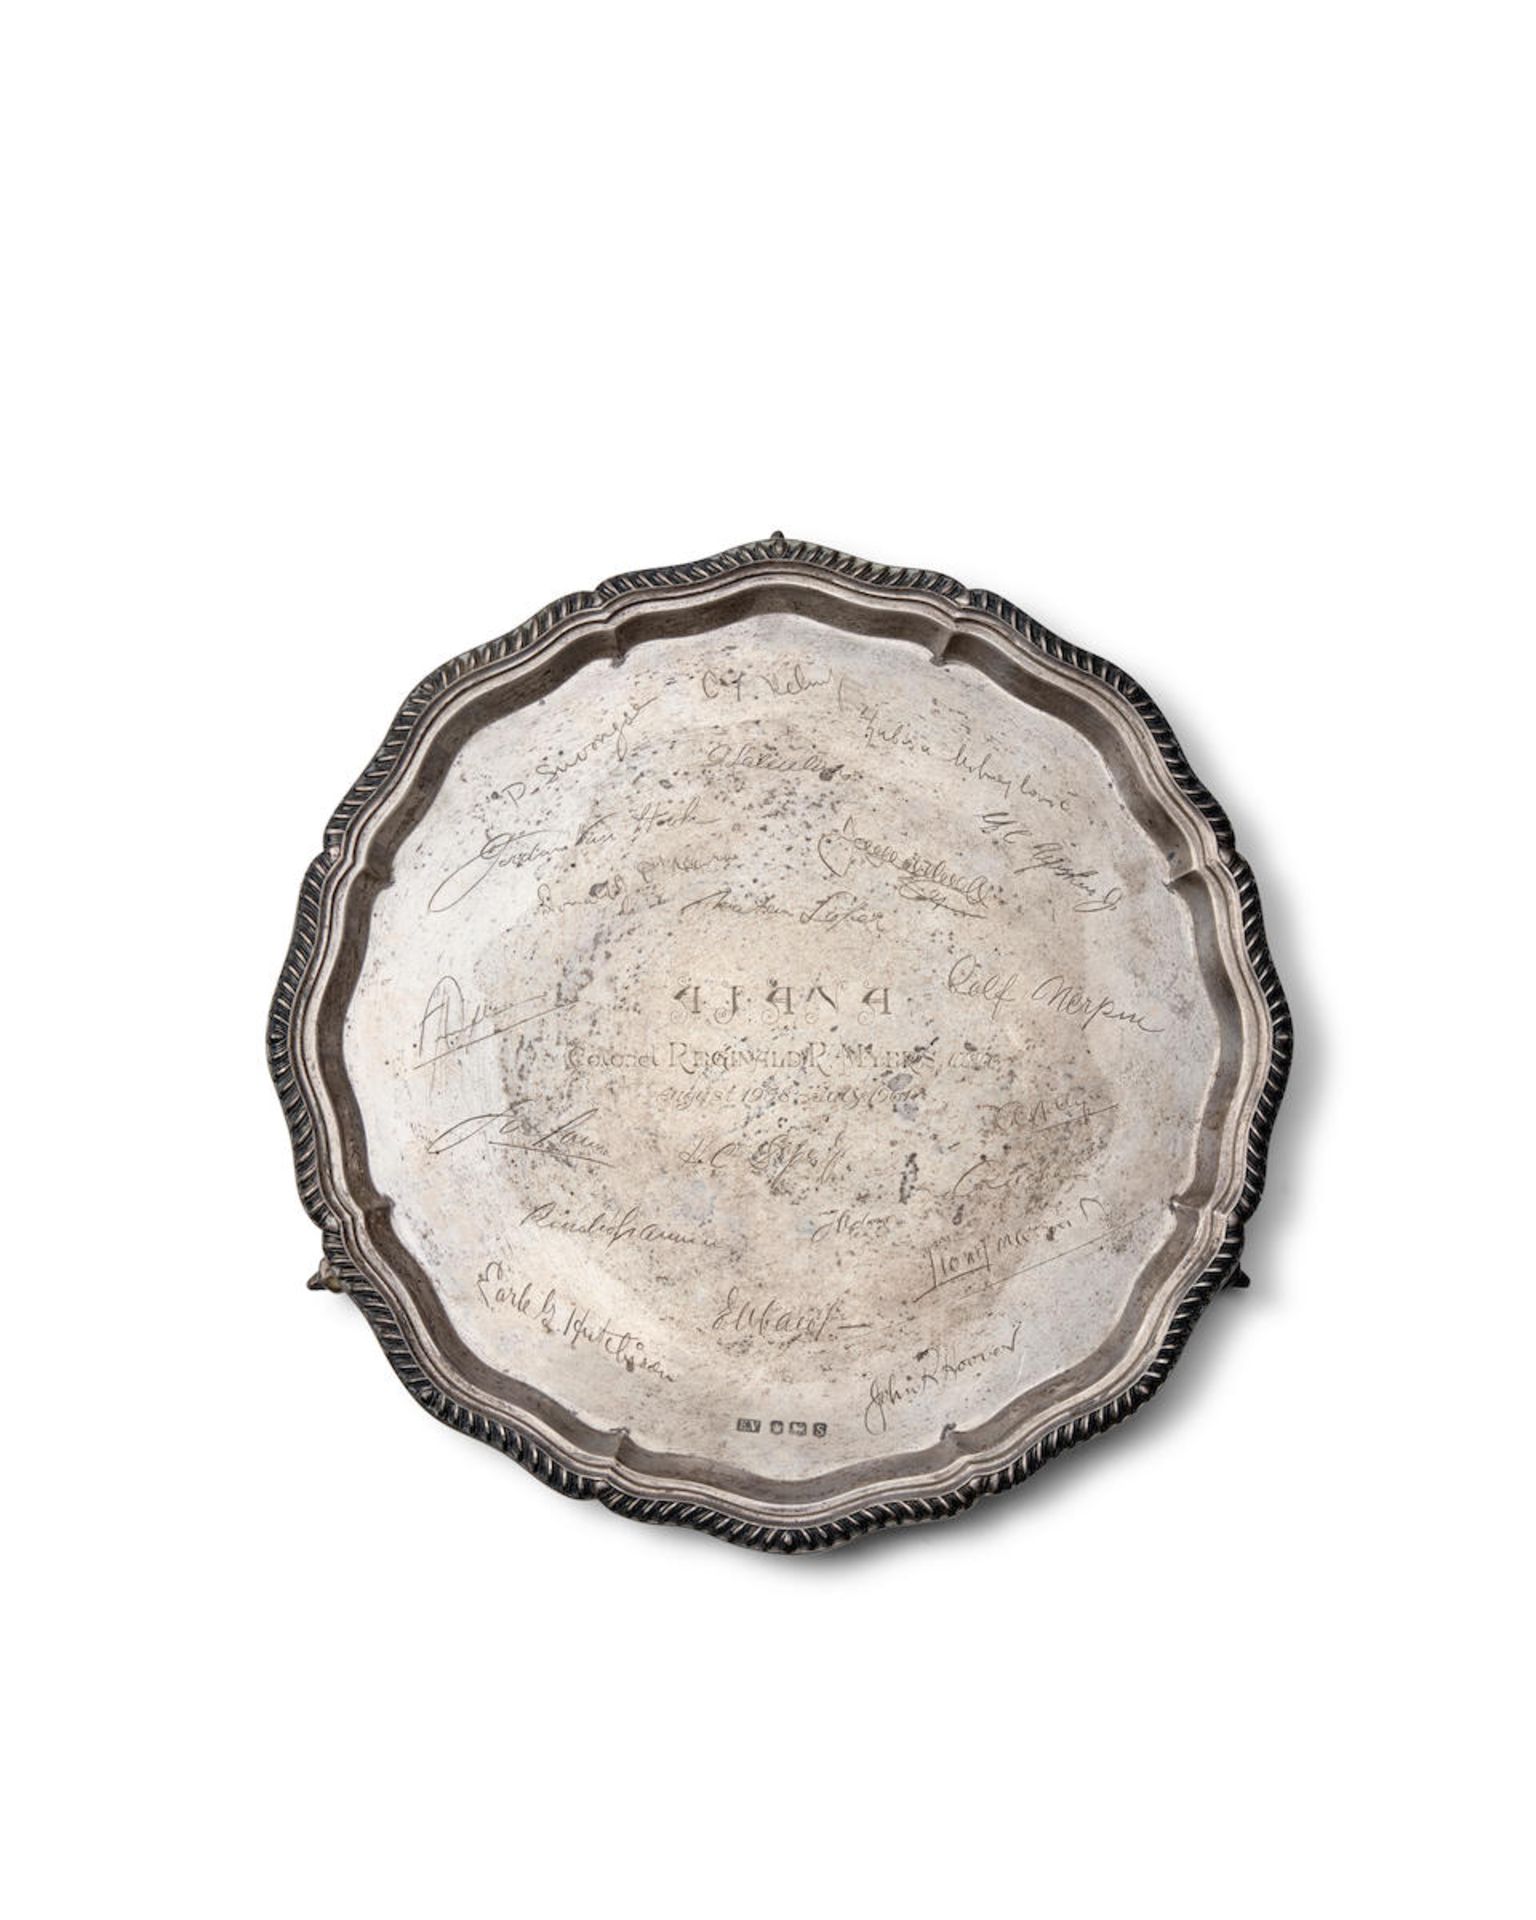 MARINE CORPS PRESENTATION SALVER. Sterling silver engraved footed salver,